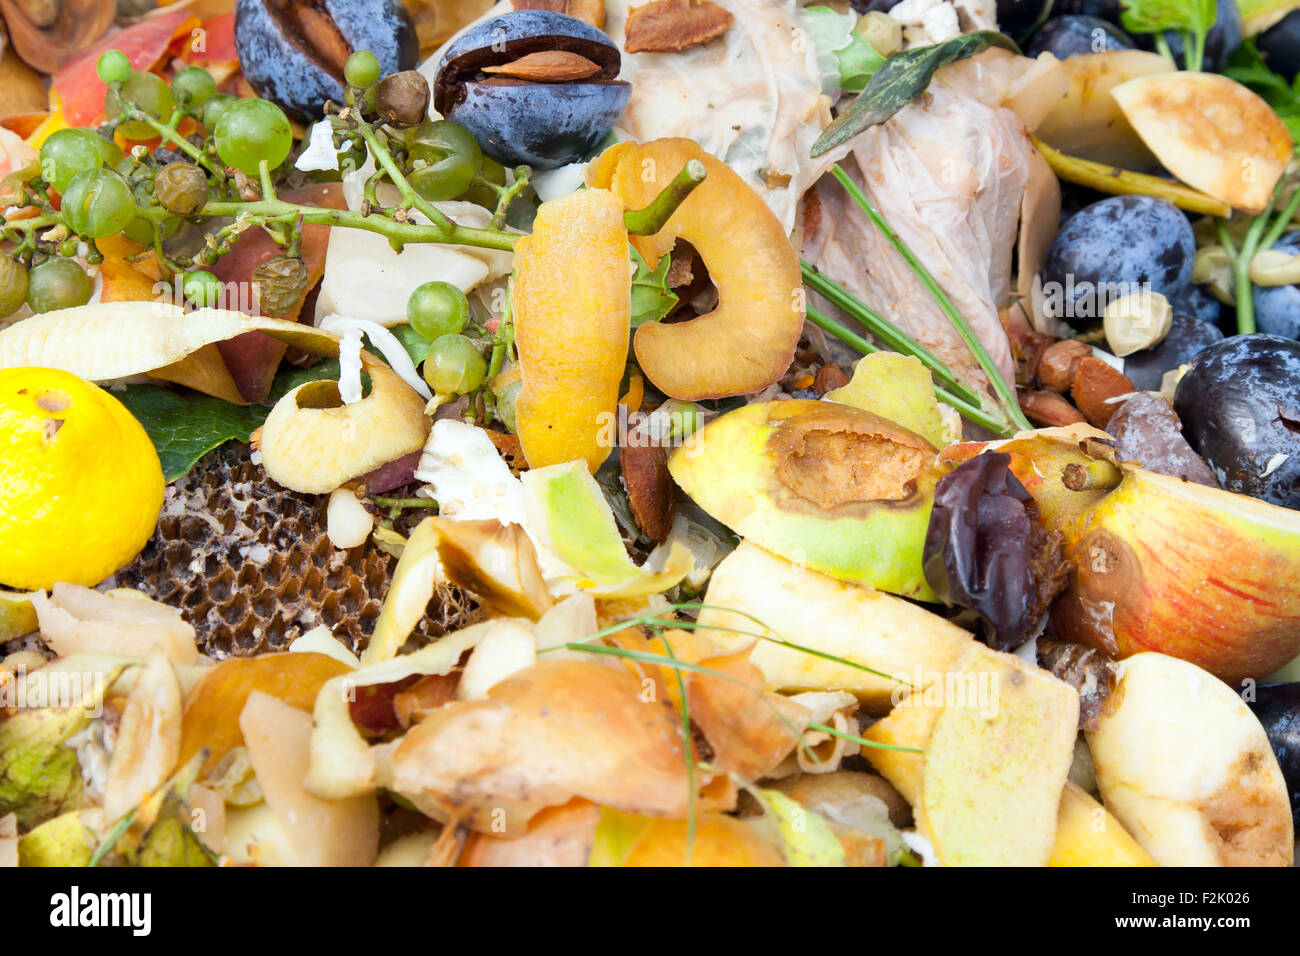 Compost bin in the garden. Composting pile of rotting kitchen fruits and vegetable scraps Stock Photo